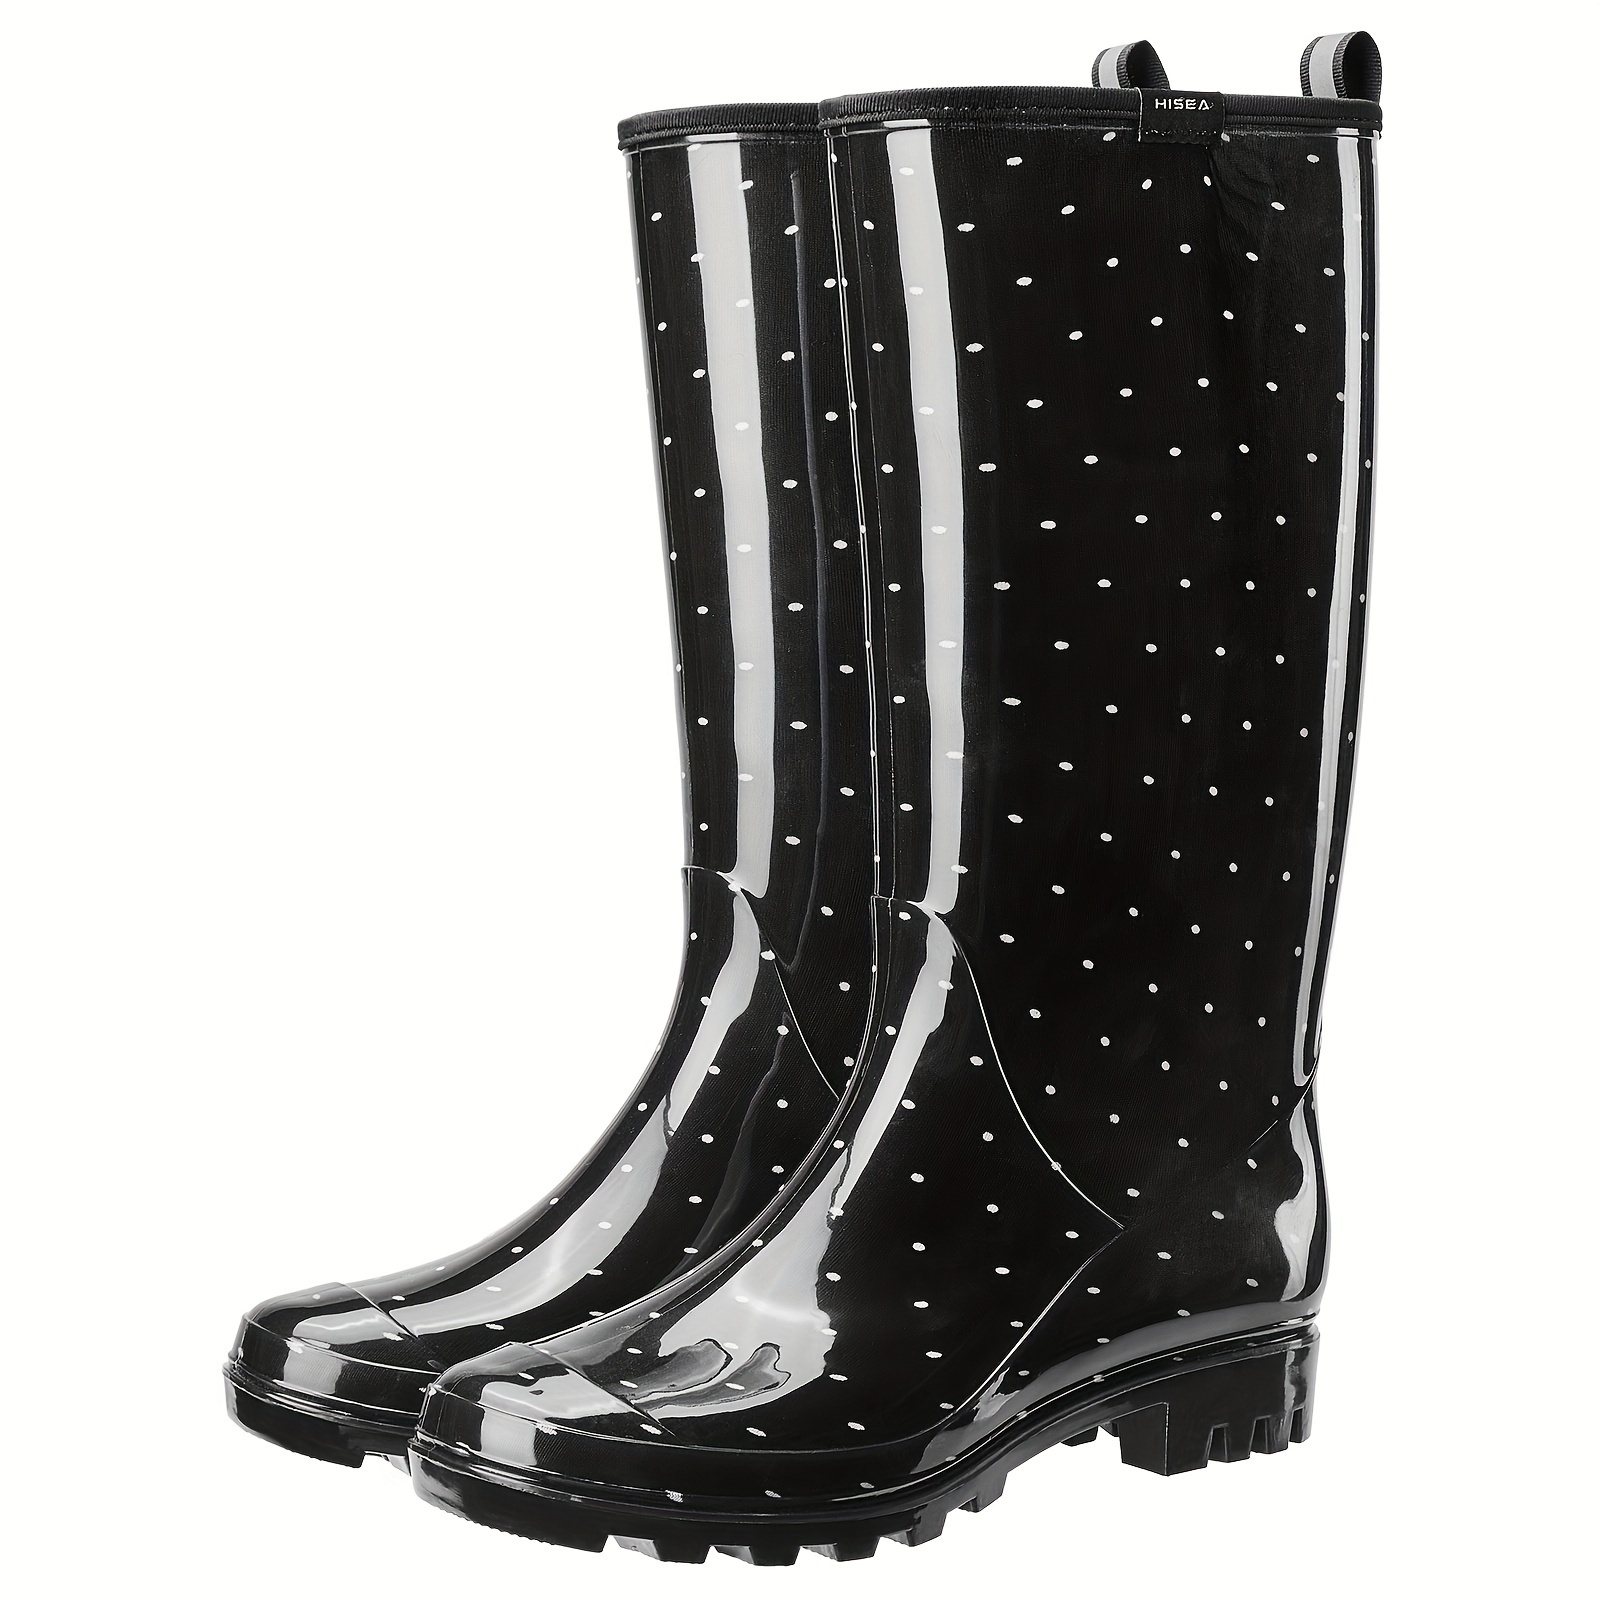 

Hisea Women's Rain Boots Waterproof Garden Shoes Colorful Printed Knee High Rubber Boots Anti-slipping Rainboots For Ladies With Comfort Insole Tall Wellington Rain Shoes